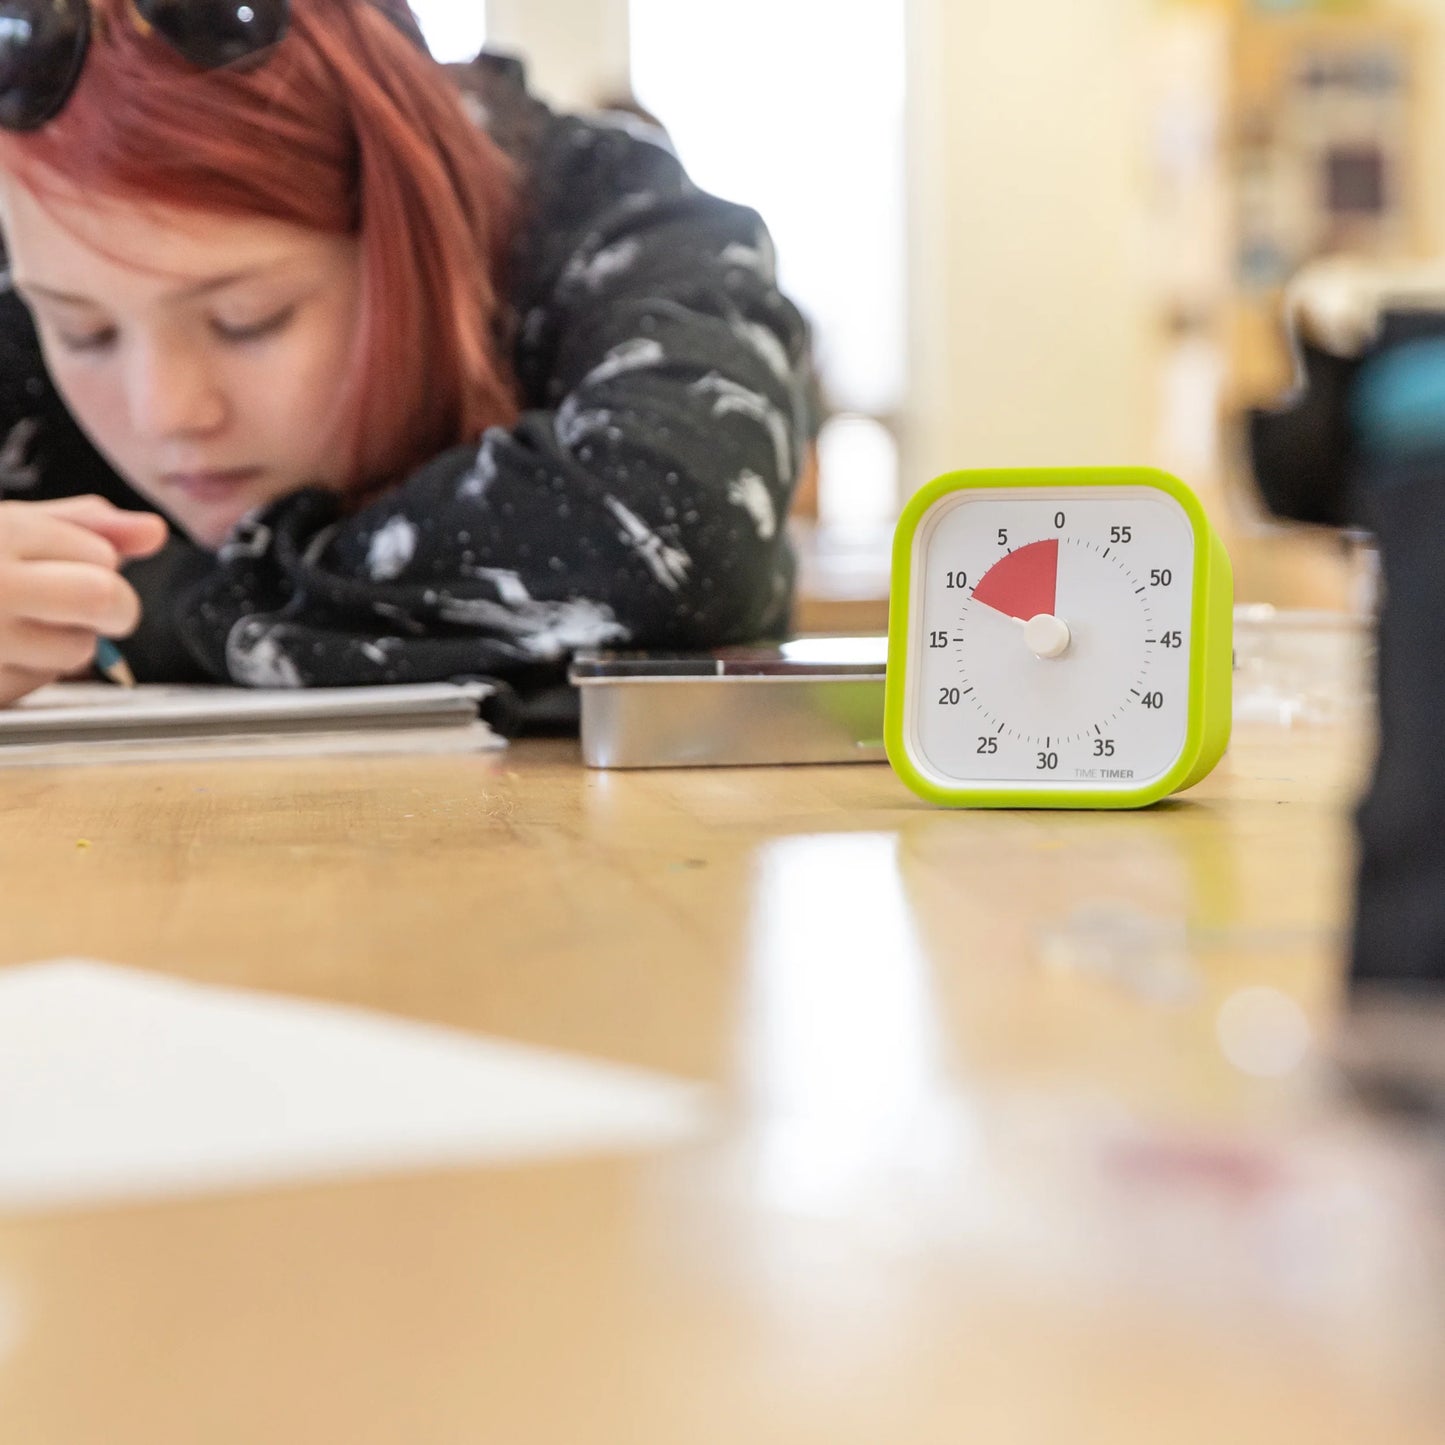 Timer_timer_education_edition_mod_being_used_to_study_by_teenage_girl_timer_set_to_ten_minutes